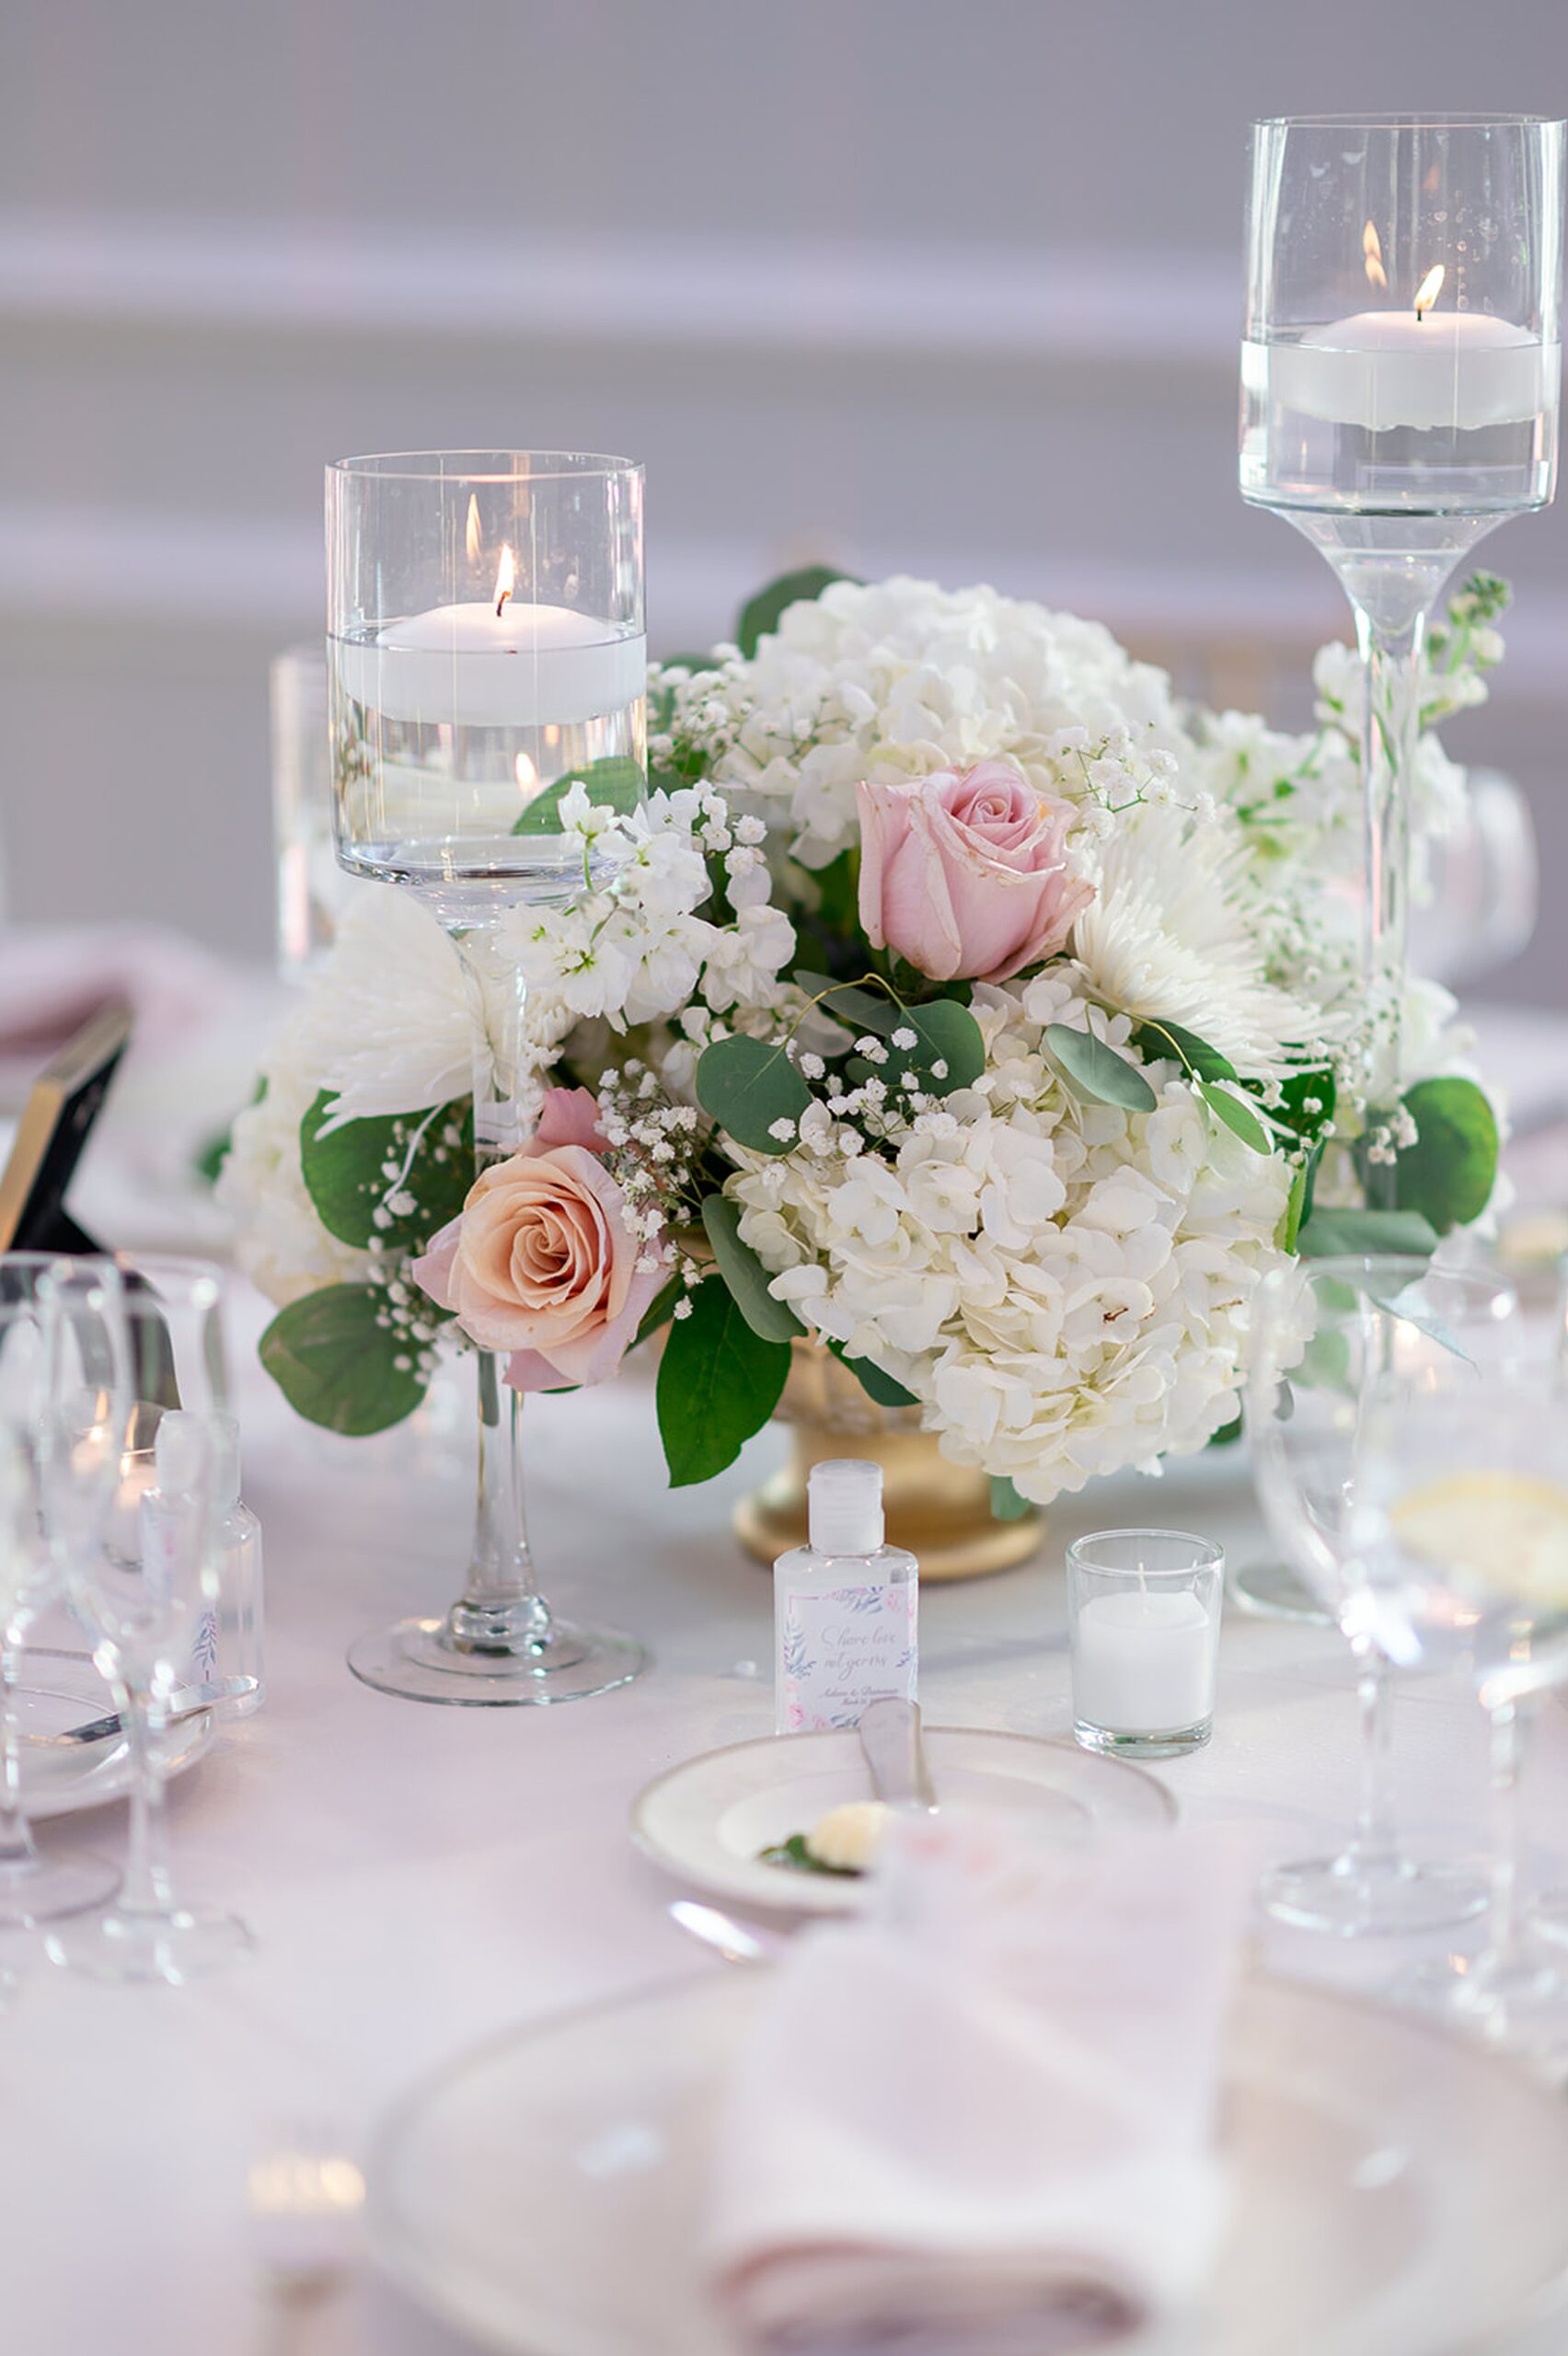 Details of a floral centerpiece at a wedding reception